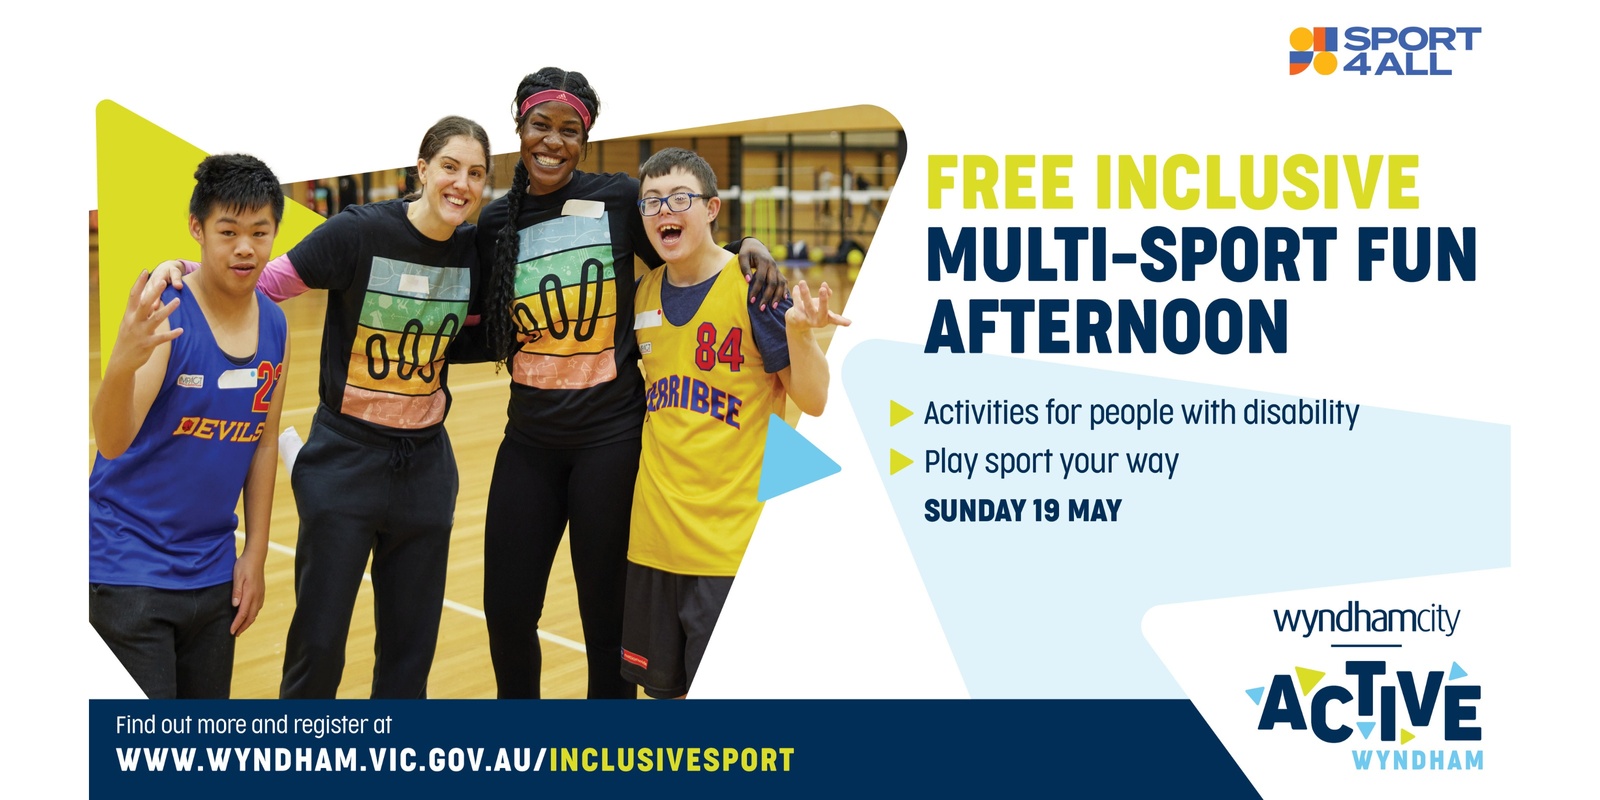 Banner image for Inclusive Multi Sport Fun Afternoon